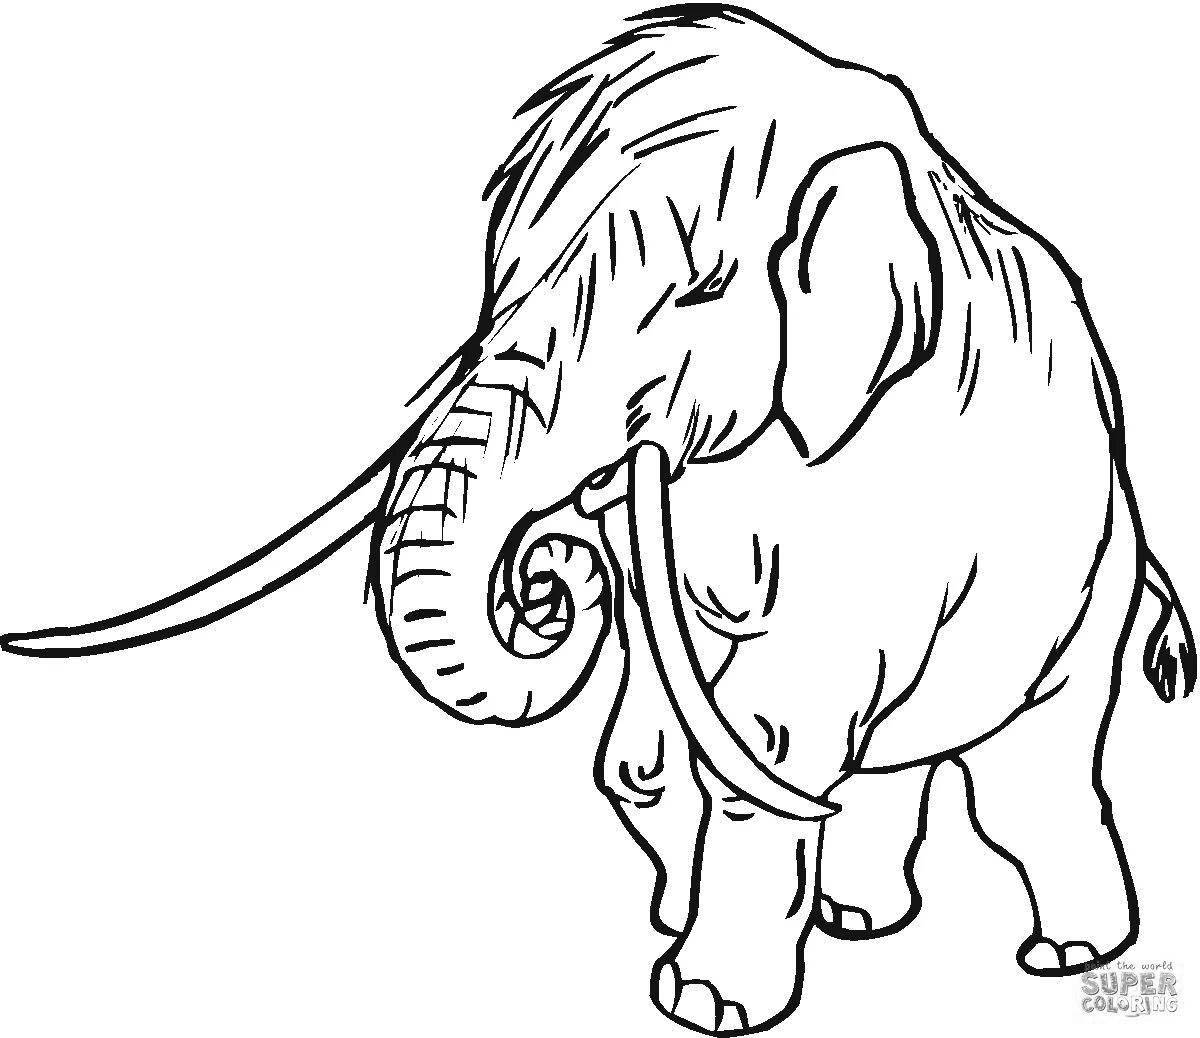 Amazing mammoth coloring page for kids